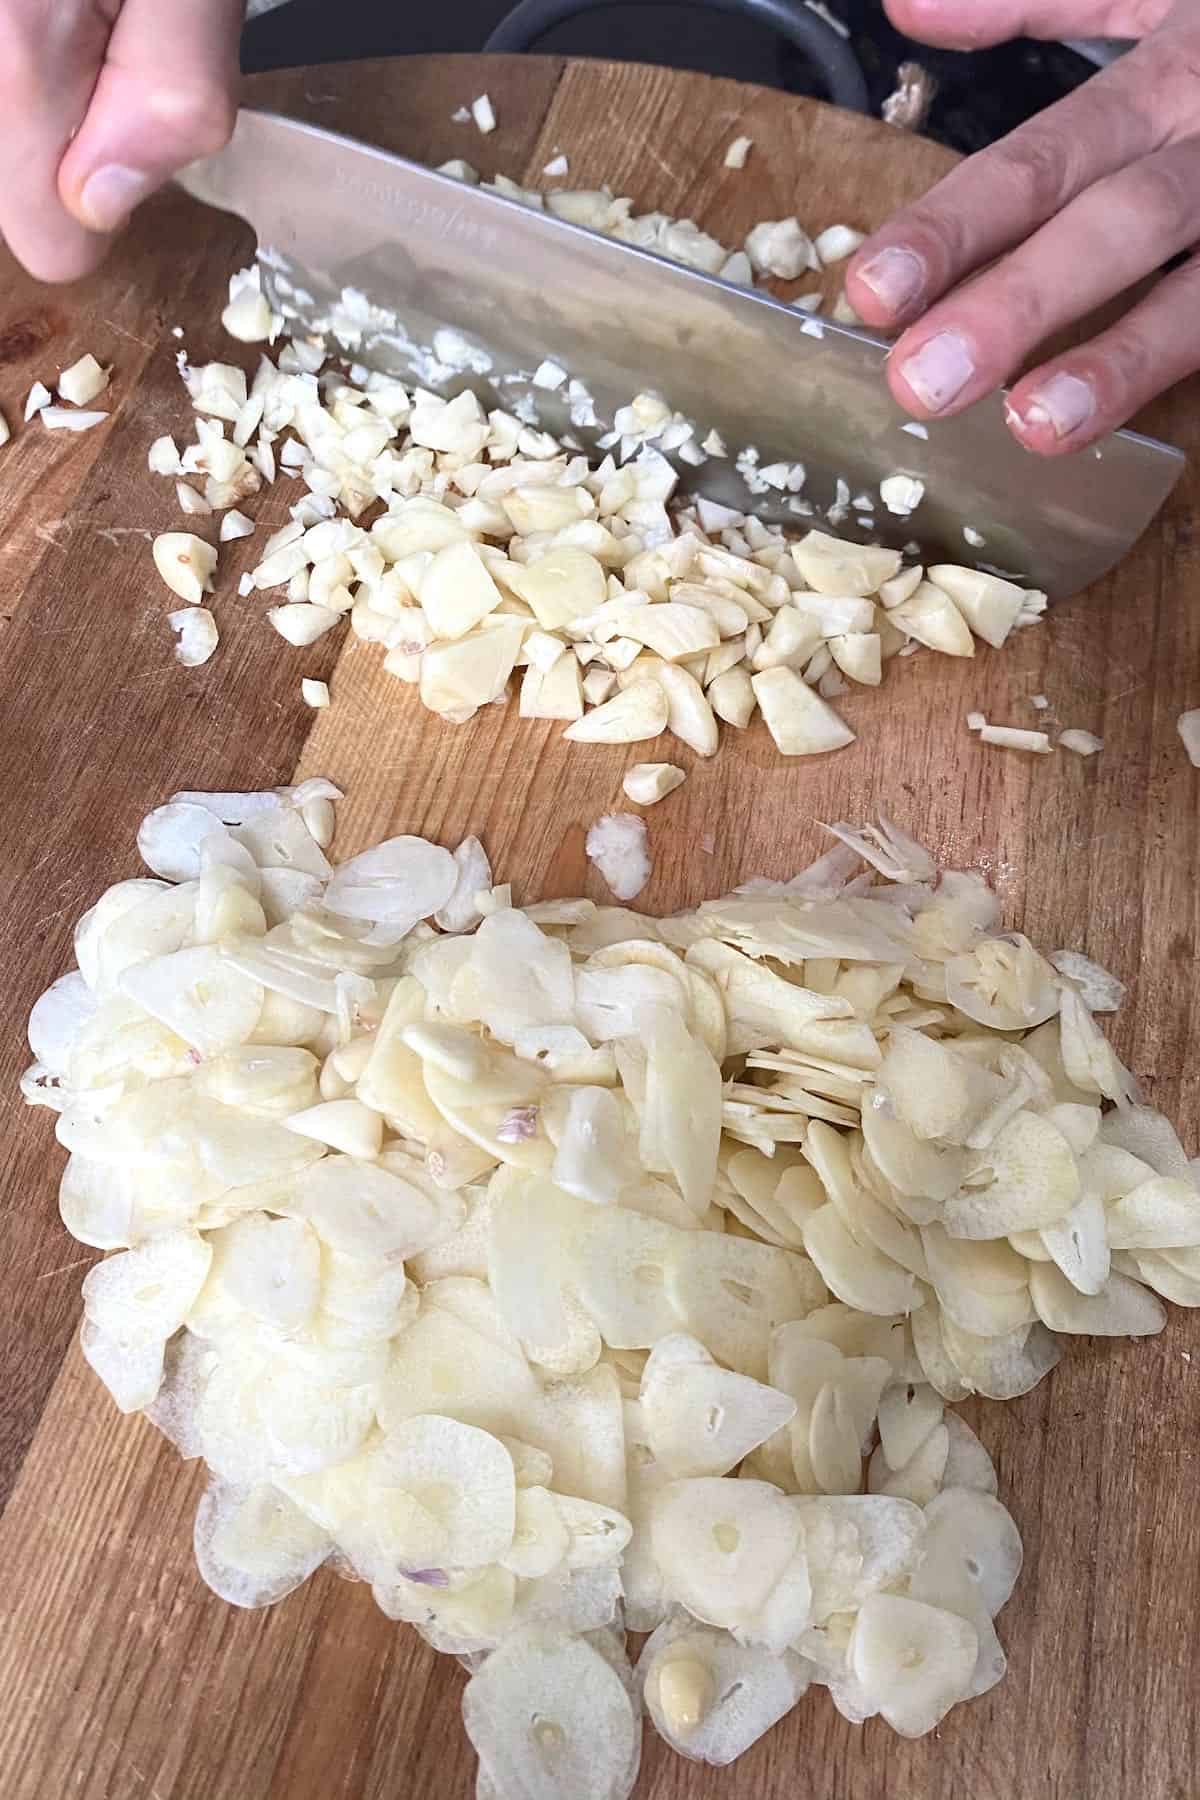 How to Make Garlic Powder: 8 Steps (with Pictures) - wikiHow